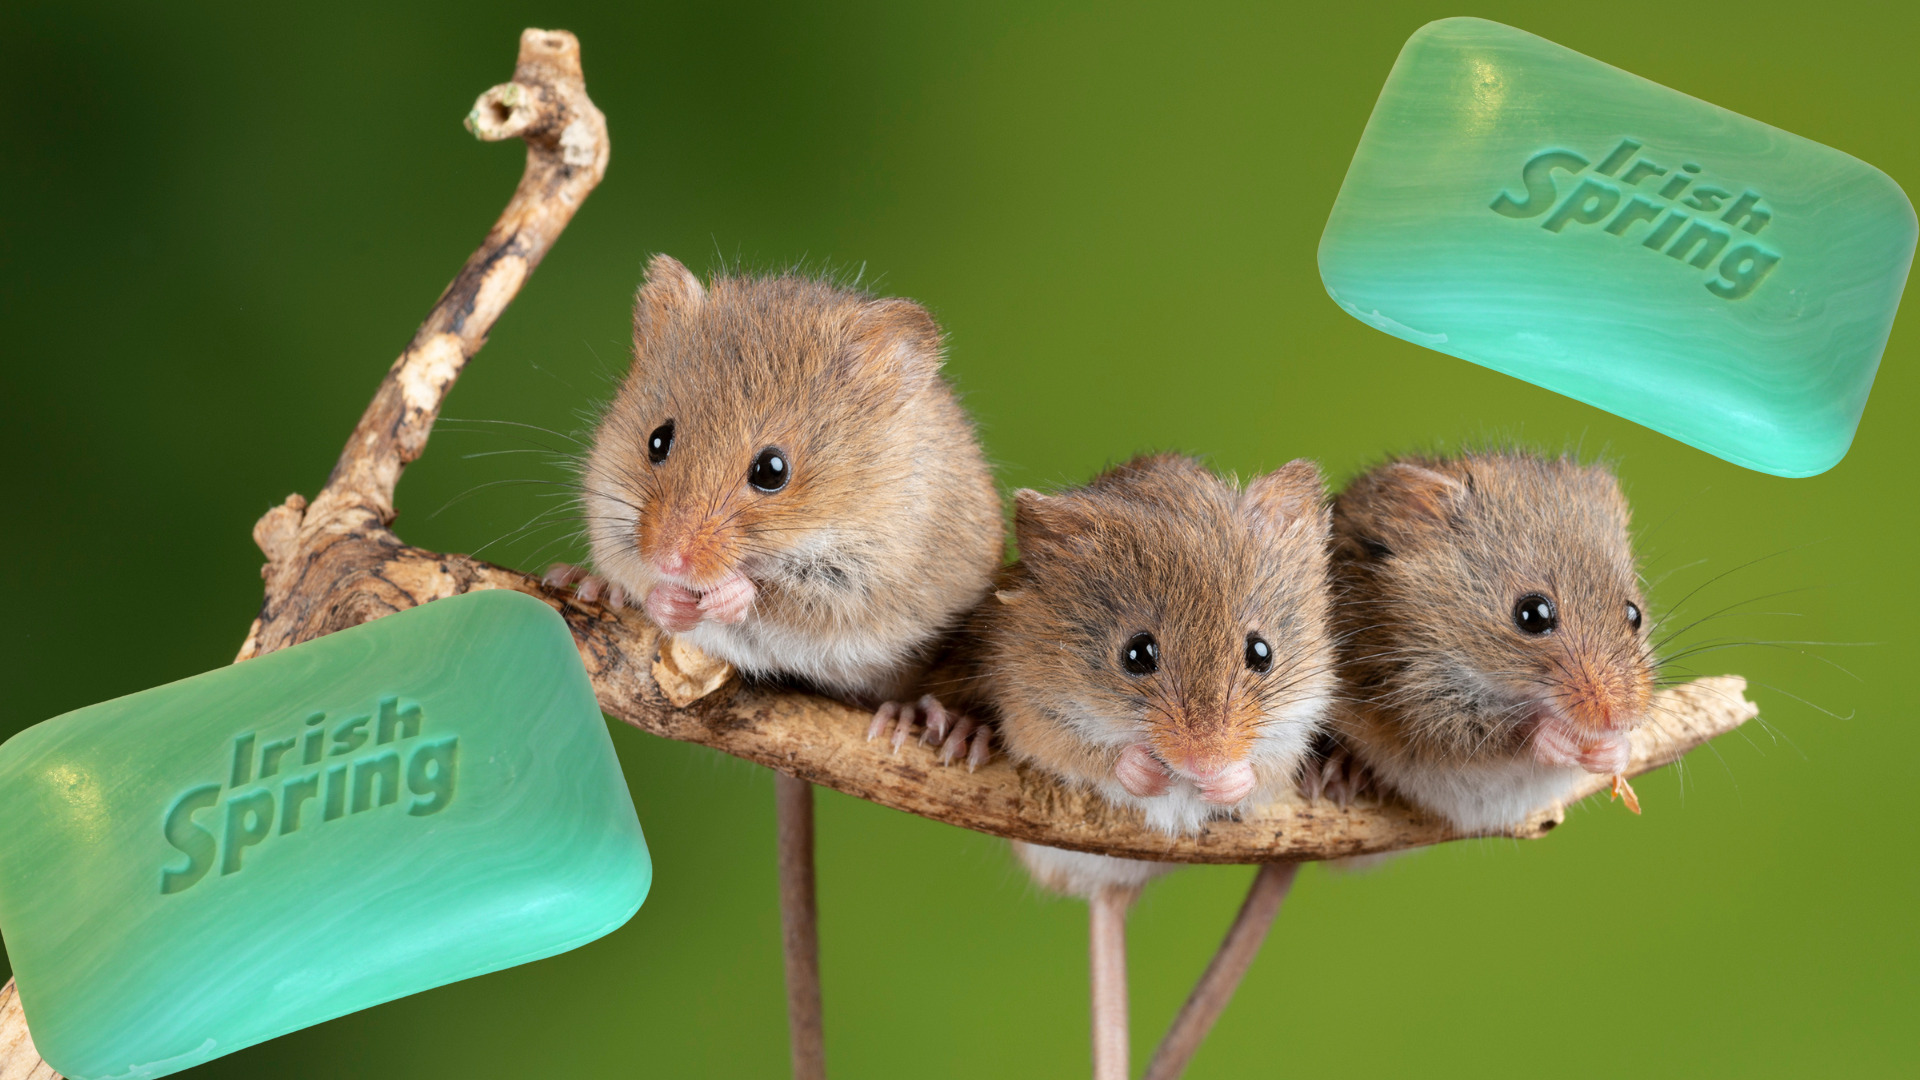 What People Get Wrong About Irish Spring Soap and Mice - Getaway Couple